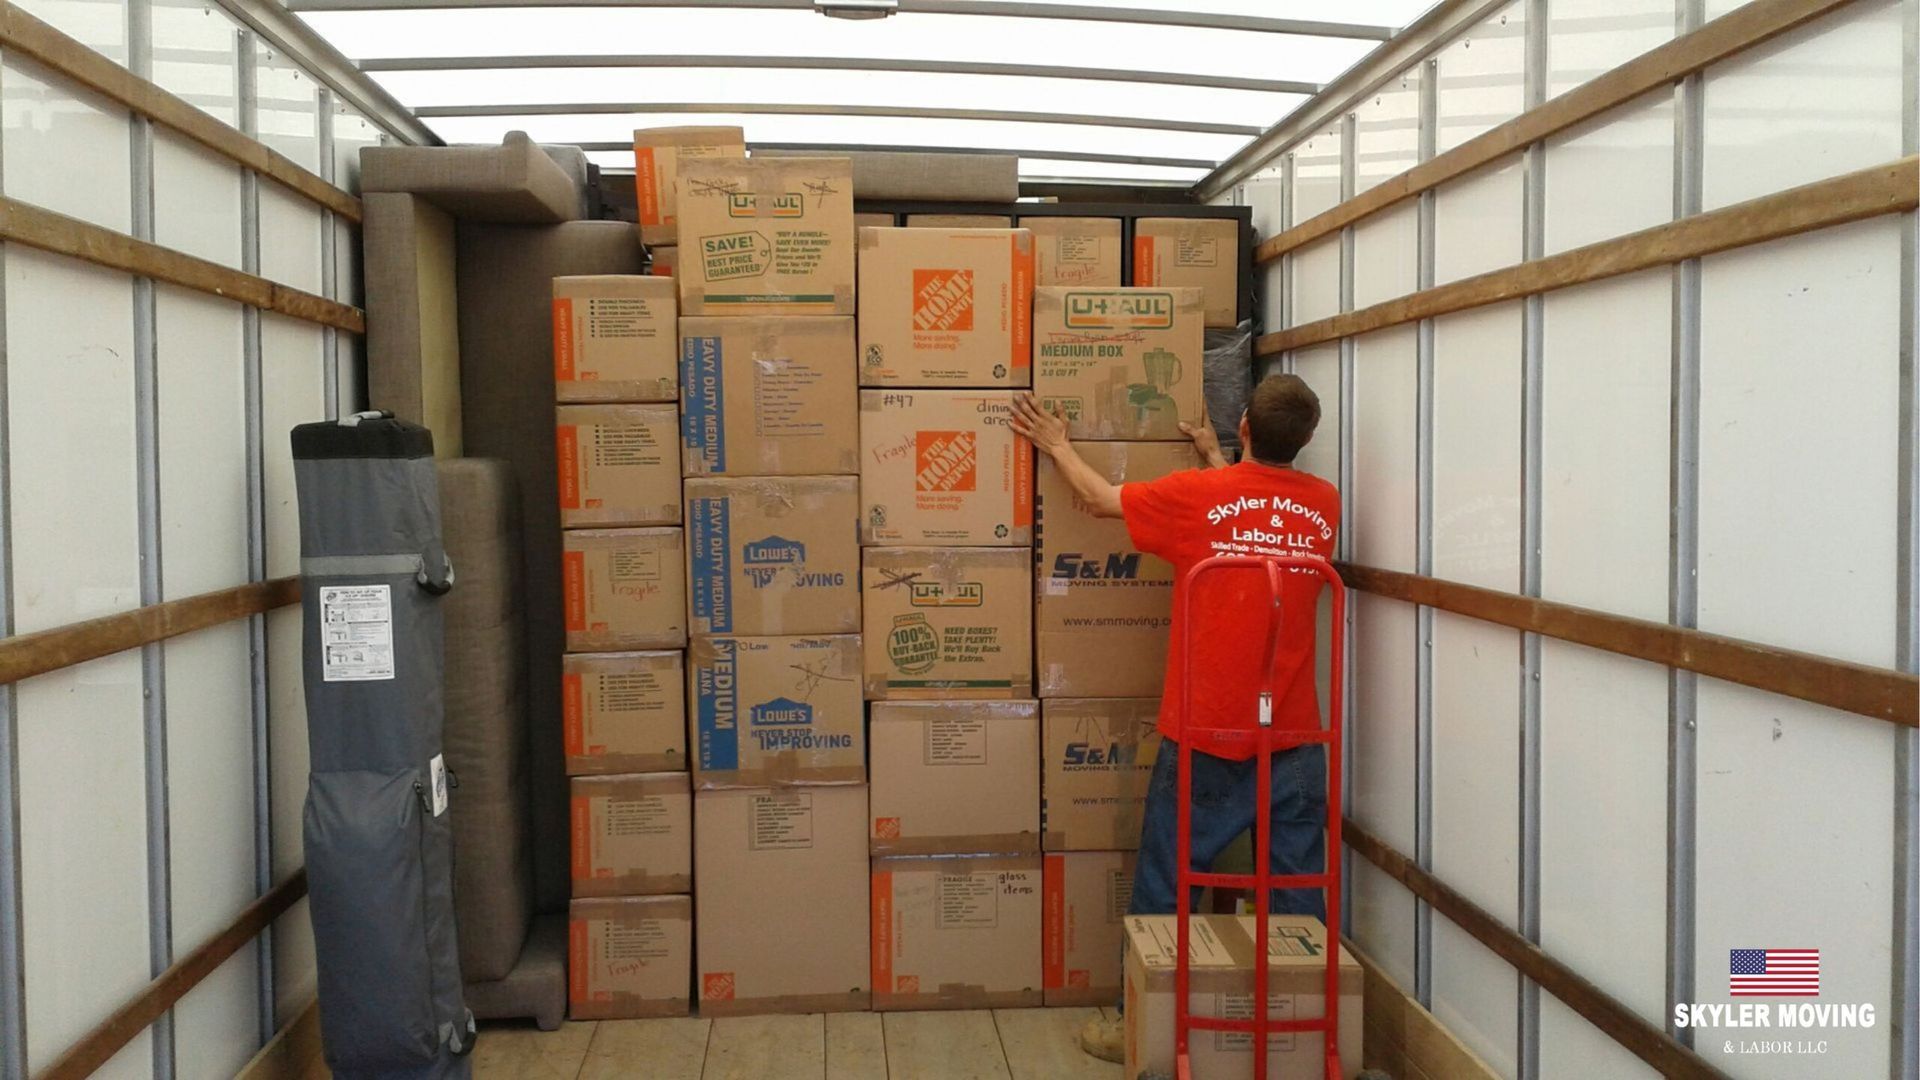 Glendale moving company loads a moving truck for local moving service near Phoenix AZ